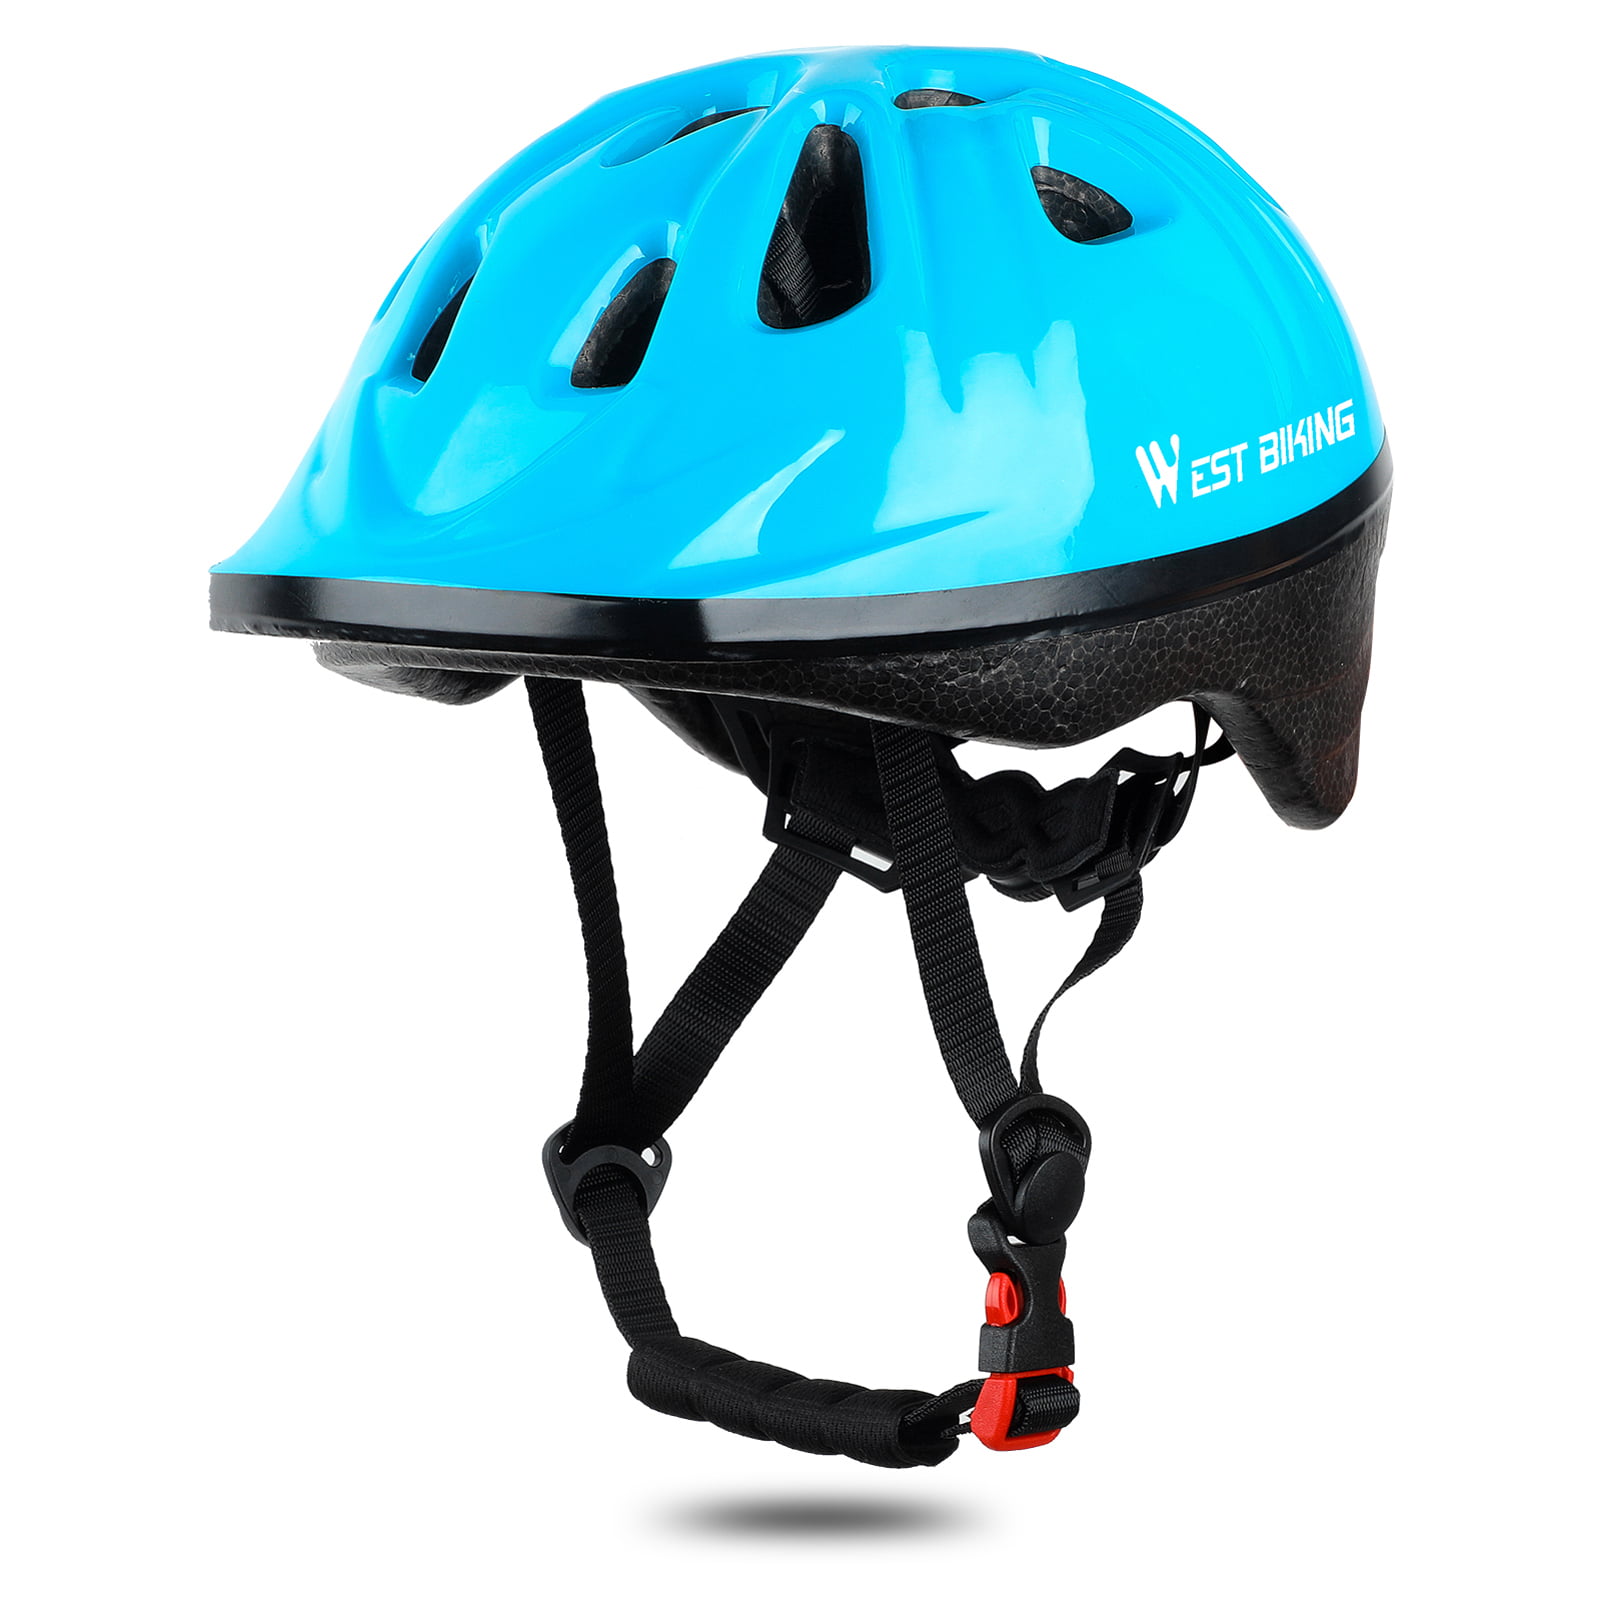 Details about   KIDS CHILDRENS BOYS GIRLS CYCLE SAFETY HELMET BIKE BICYCLE SKATING PROTECTIVE 